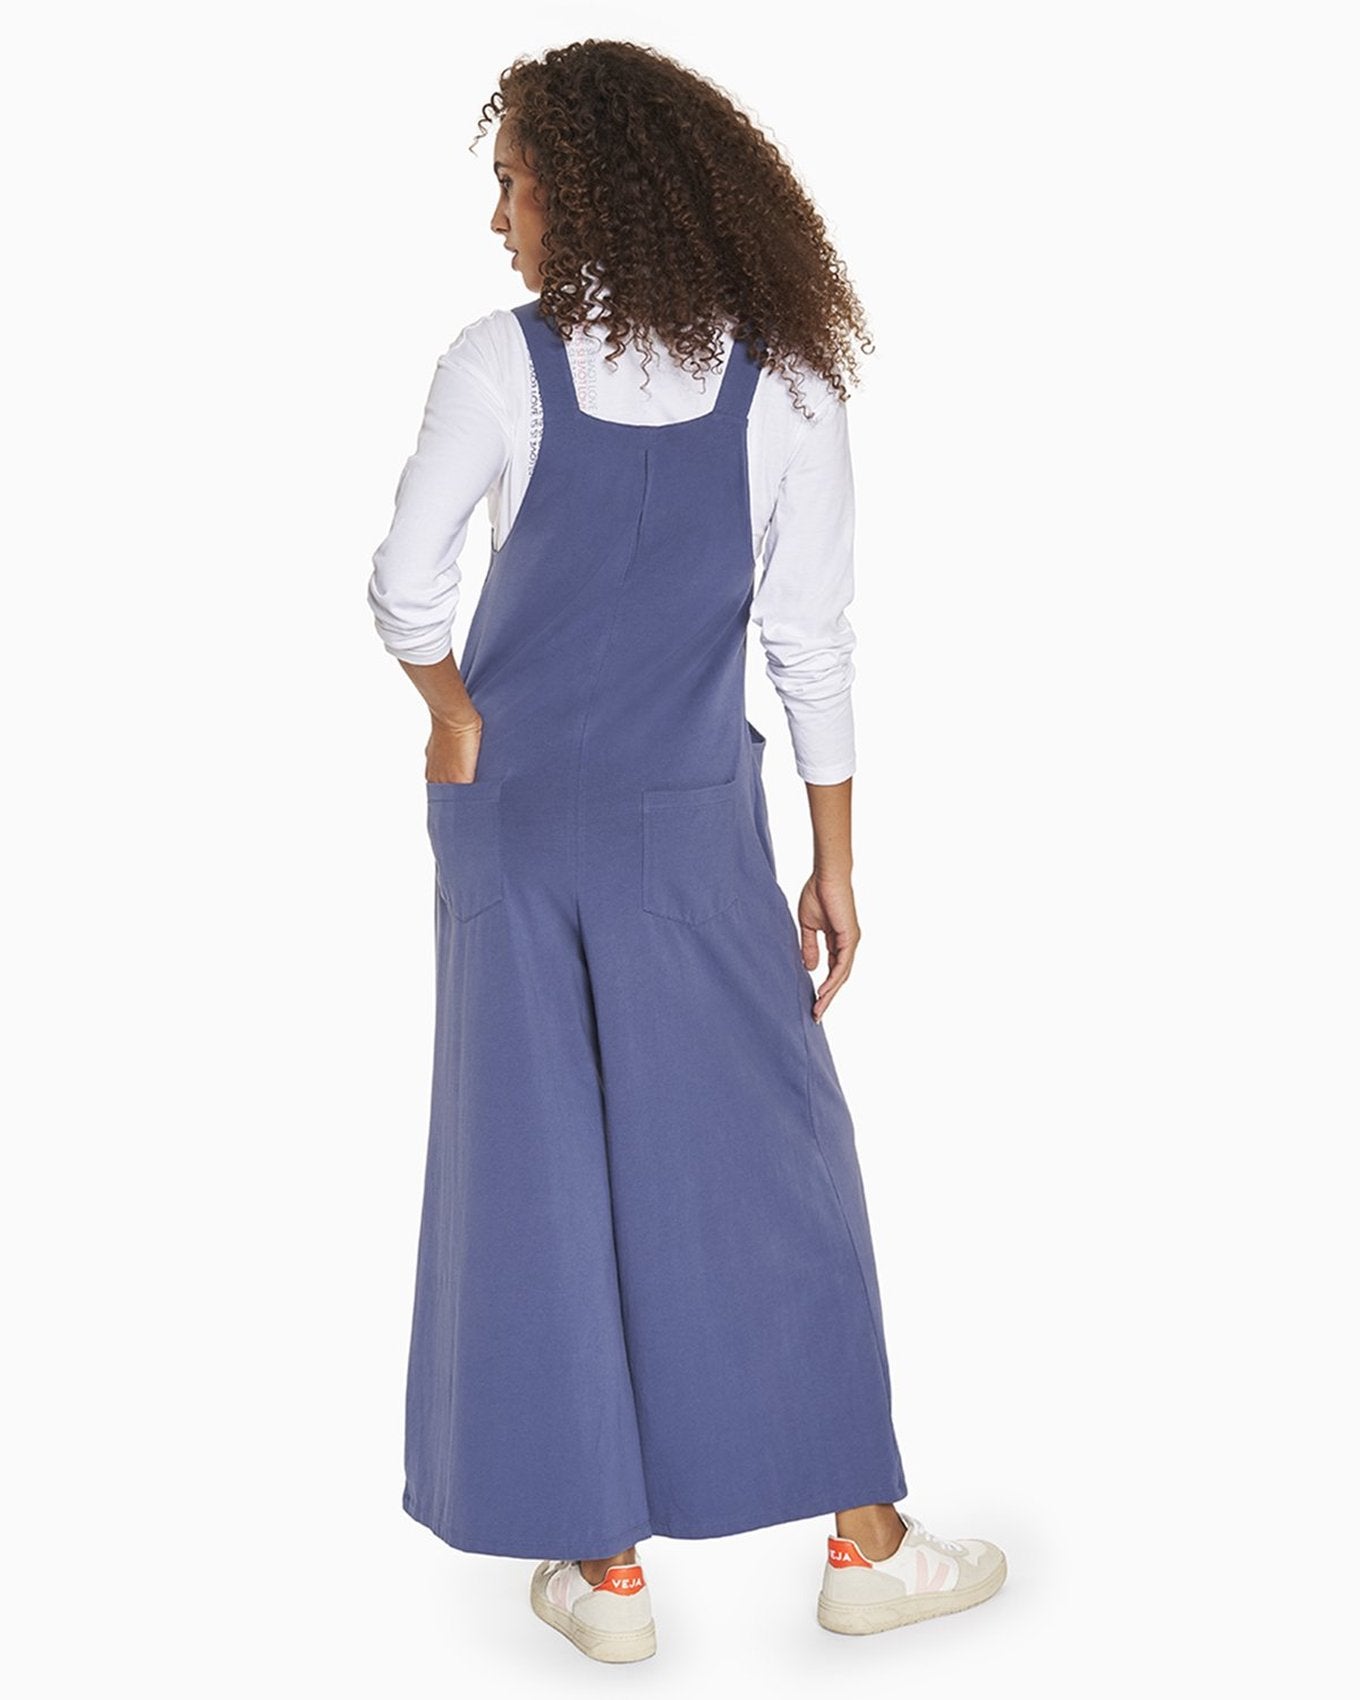 YesAnd Organic Knit Overalls Knit Overalls in color Blue Indigo and shape jumpsuit